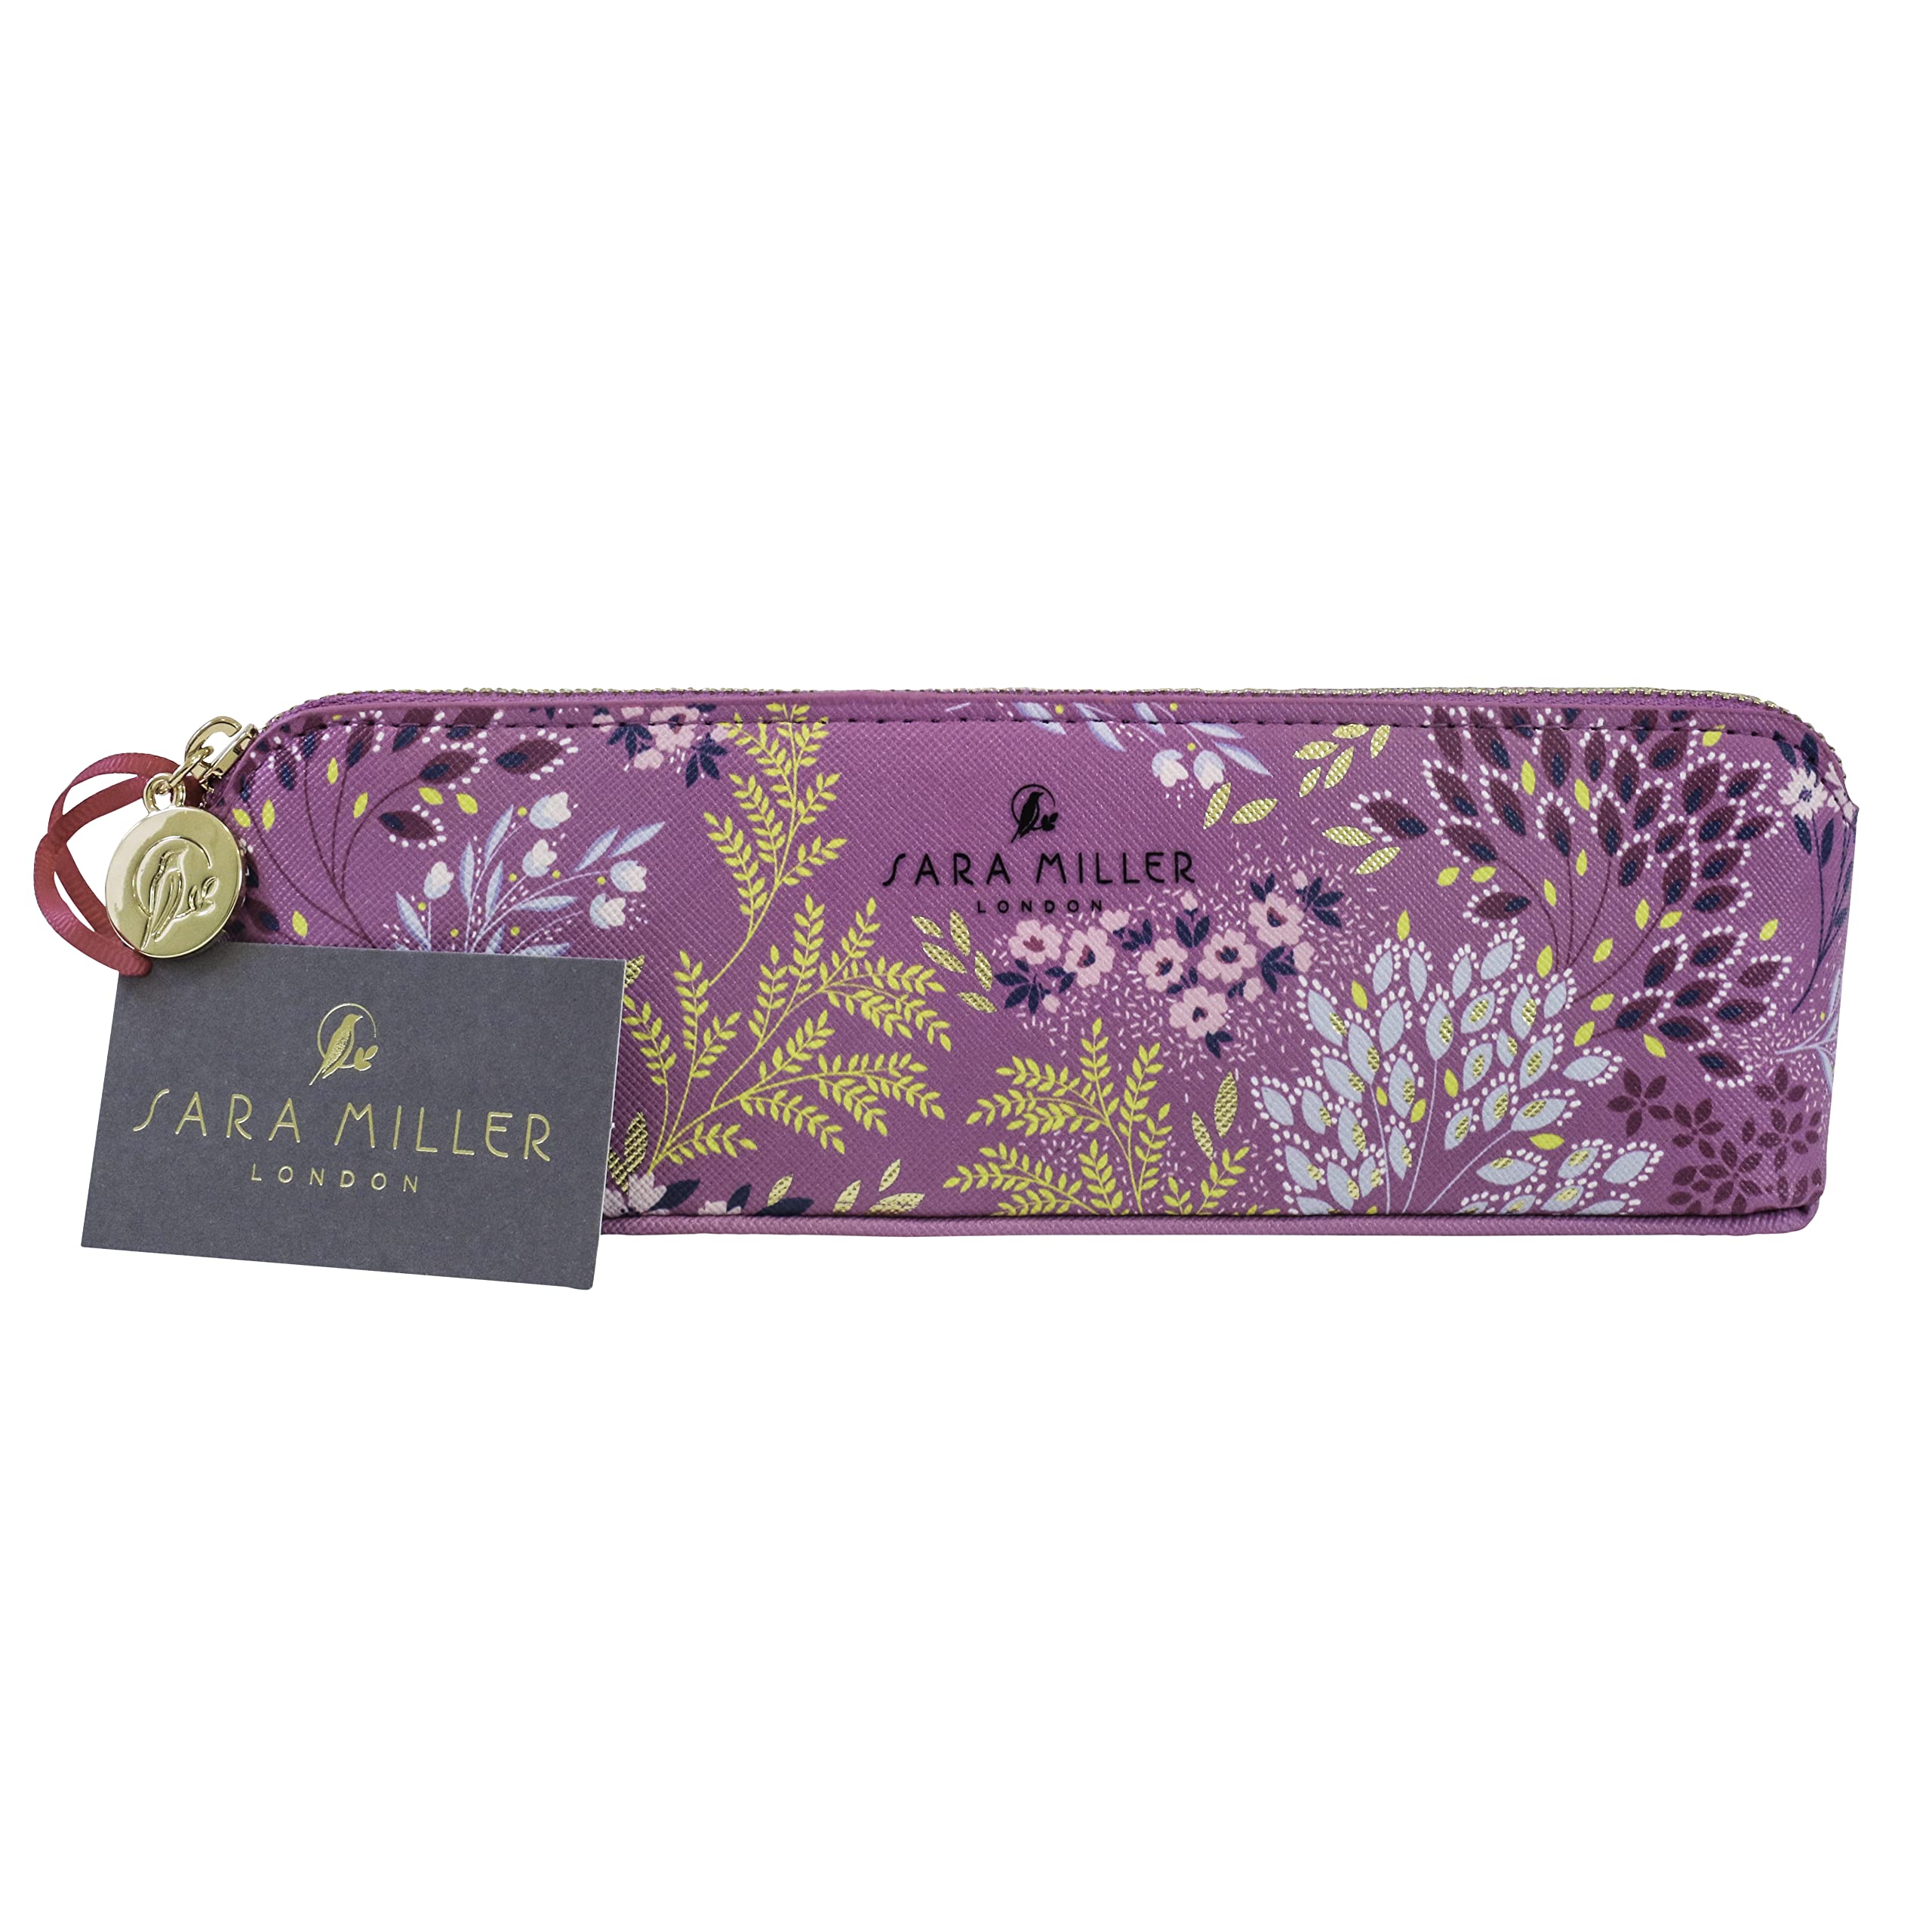 Portico Designs Pencil Case Sara Miller London Faux Leather Small Zippered Pouch, Purple